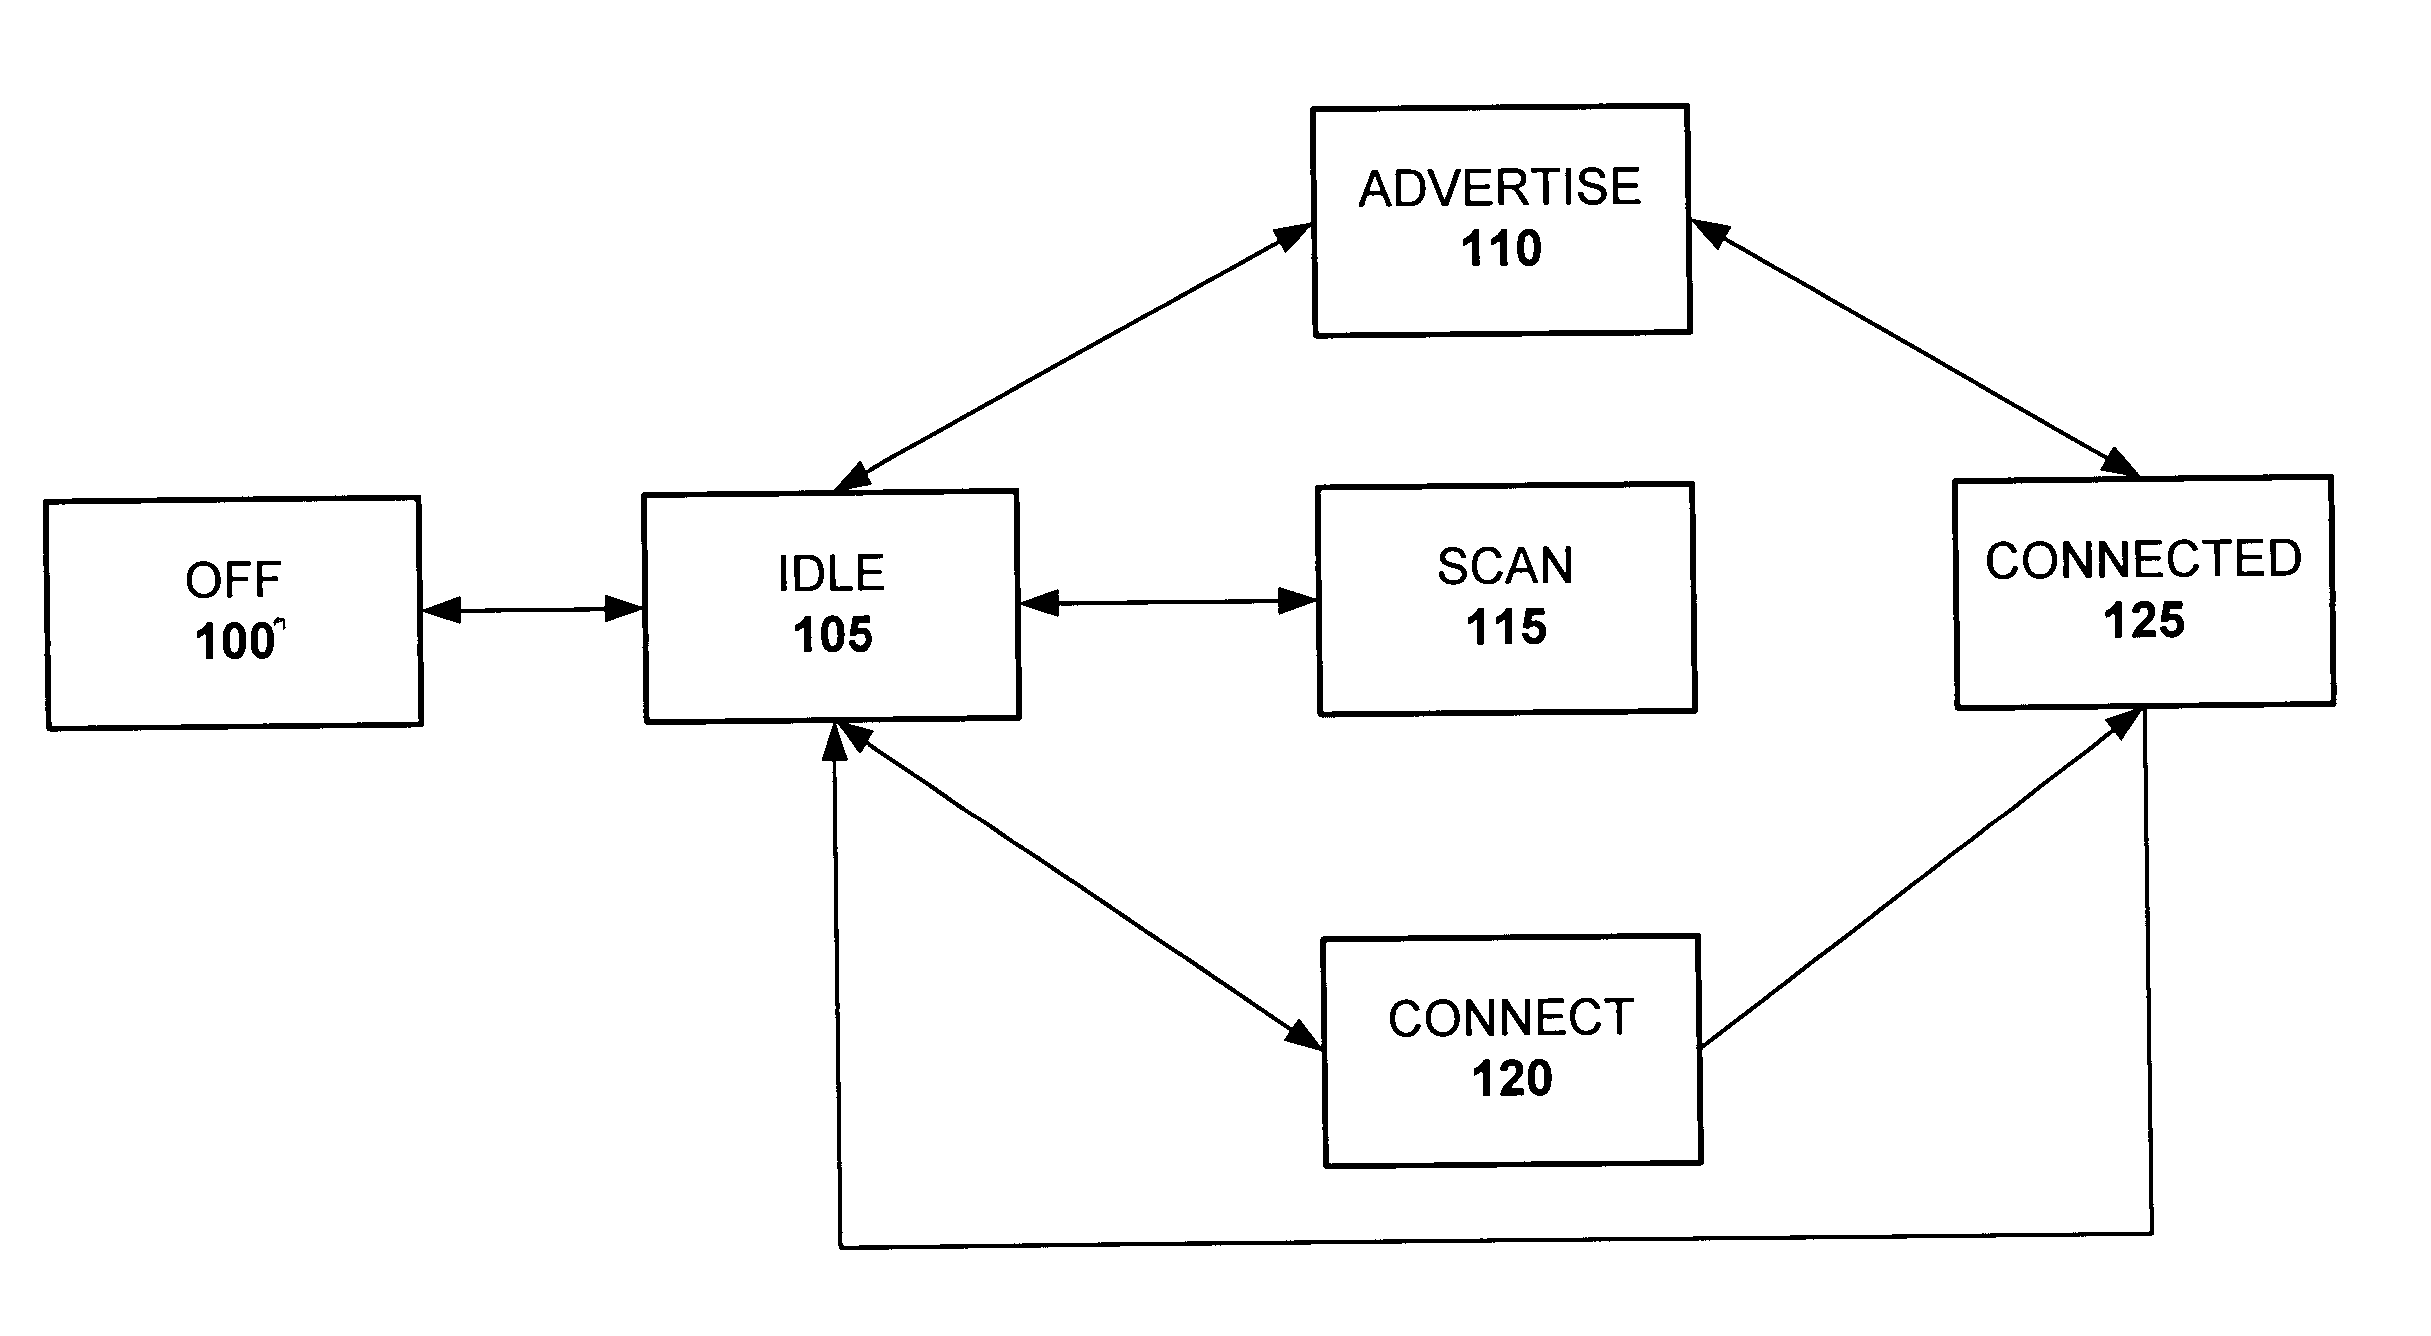 Connected mode for low-end radio